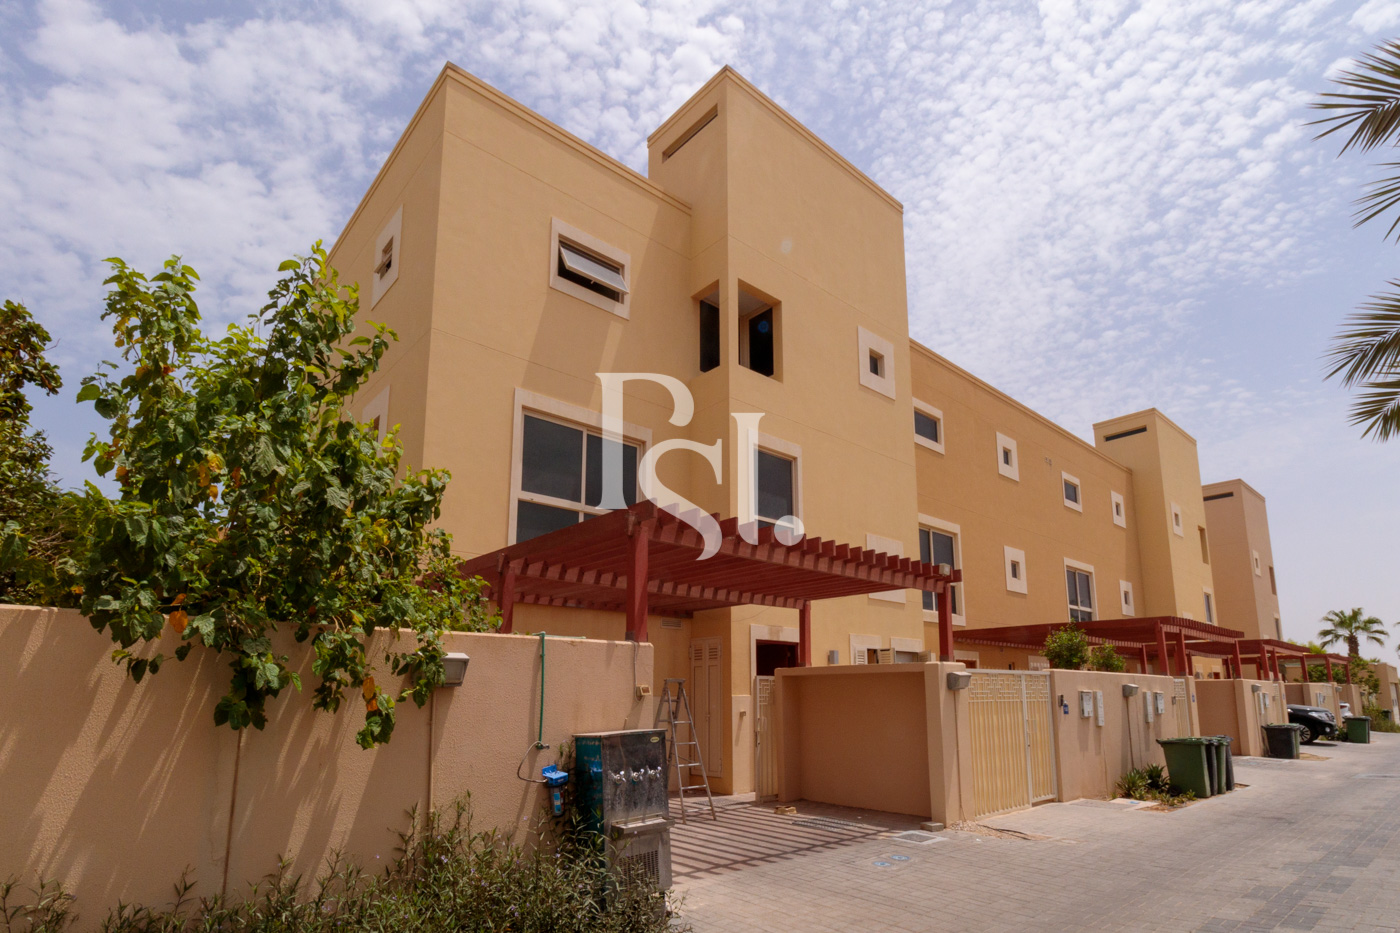 Hot Price 4 BR Townhouse w/ Maid’s and Study Room, Terrace & Lawn